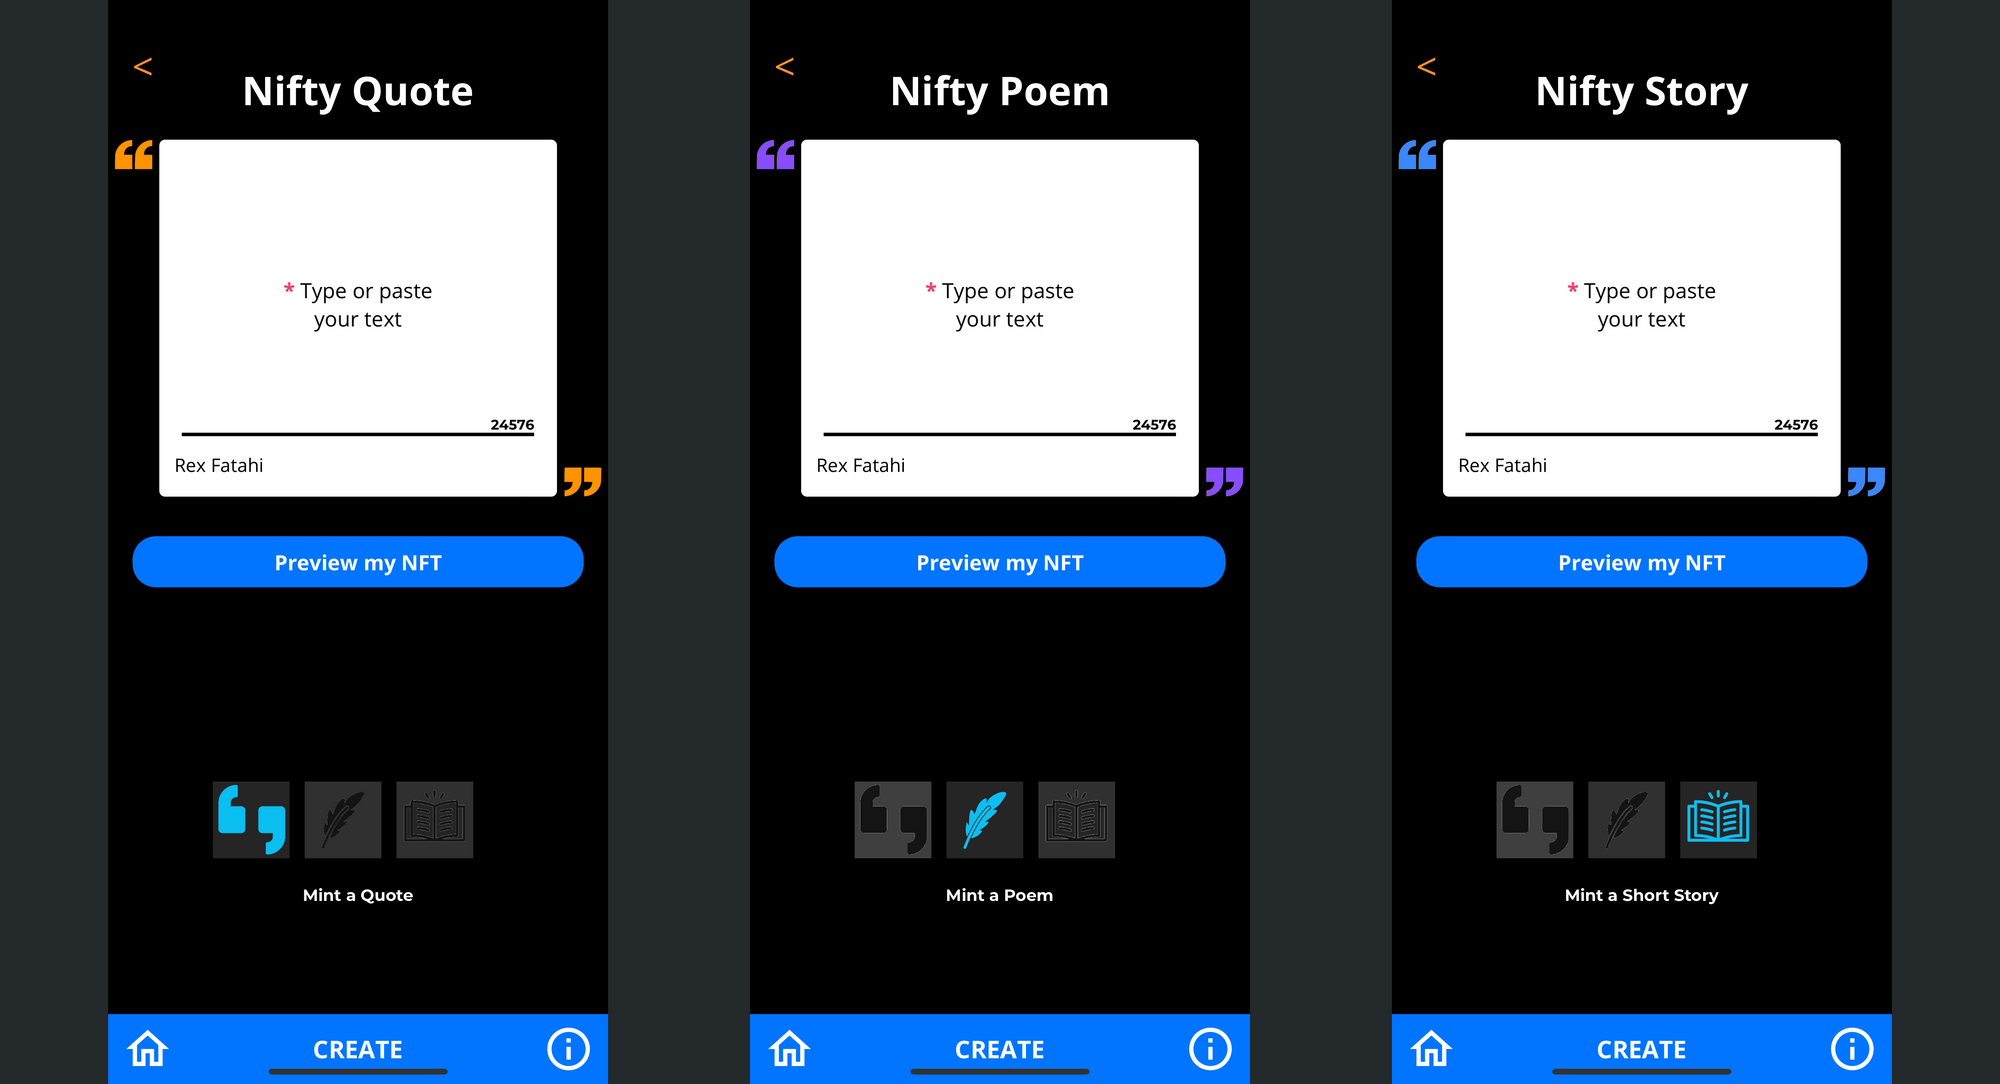 Mint NFTs for Quotes, Poems, and Short Stories